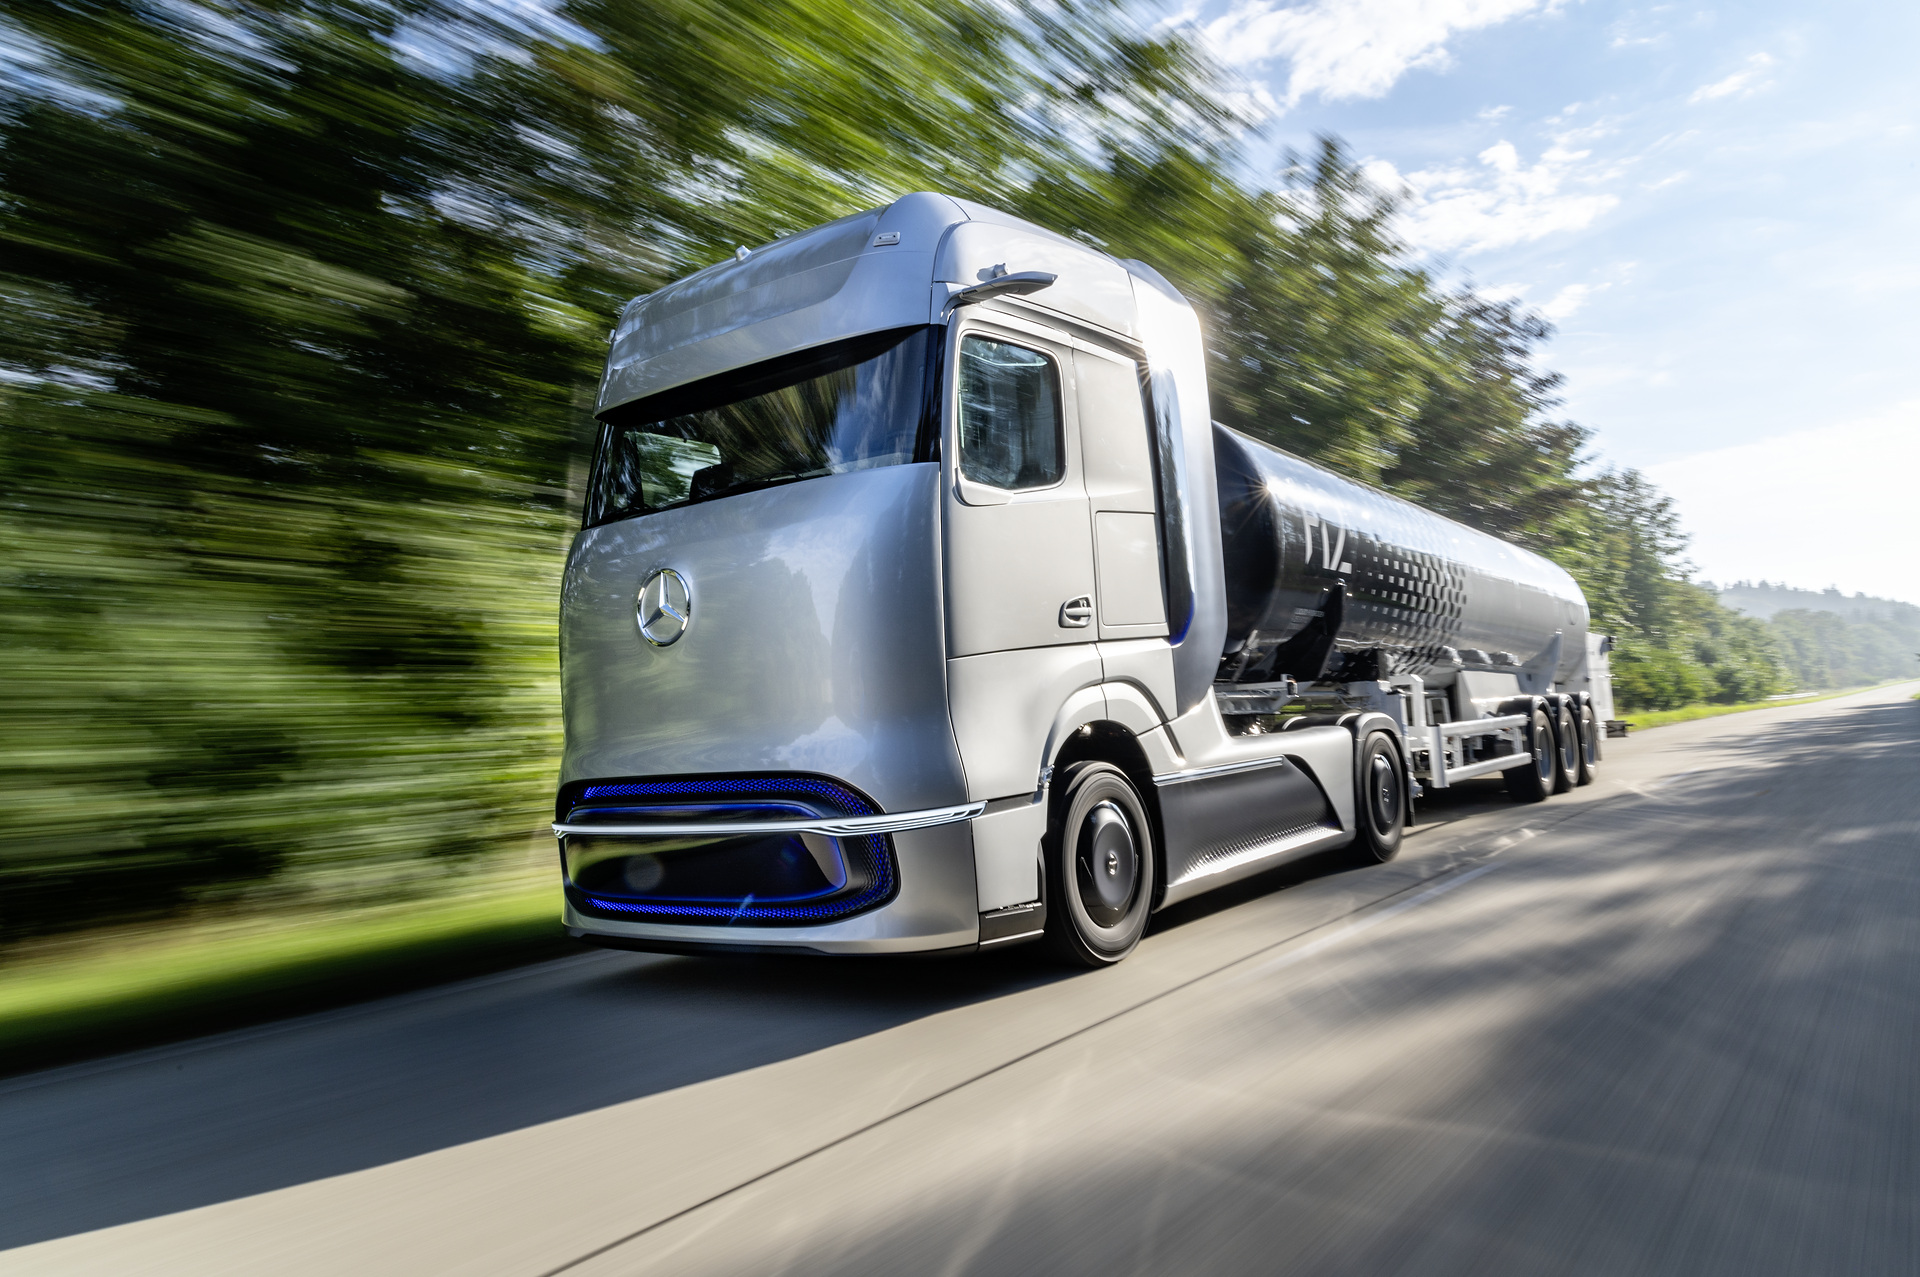 Simple refueling at filling stations: Linde and Daimler Truck AG to collaborate on liquid-hydrogen refueling technology for trucks